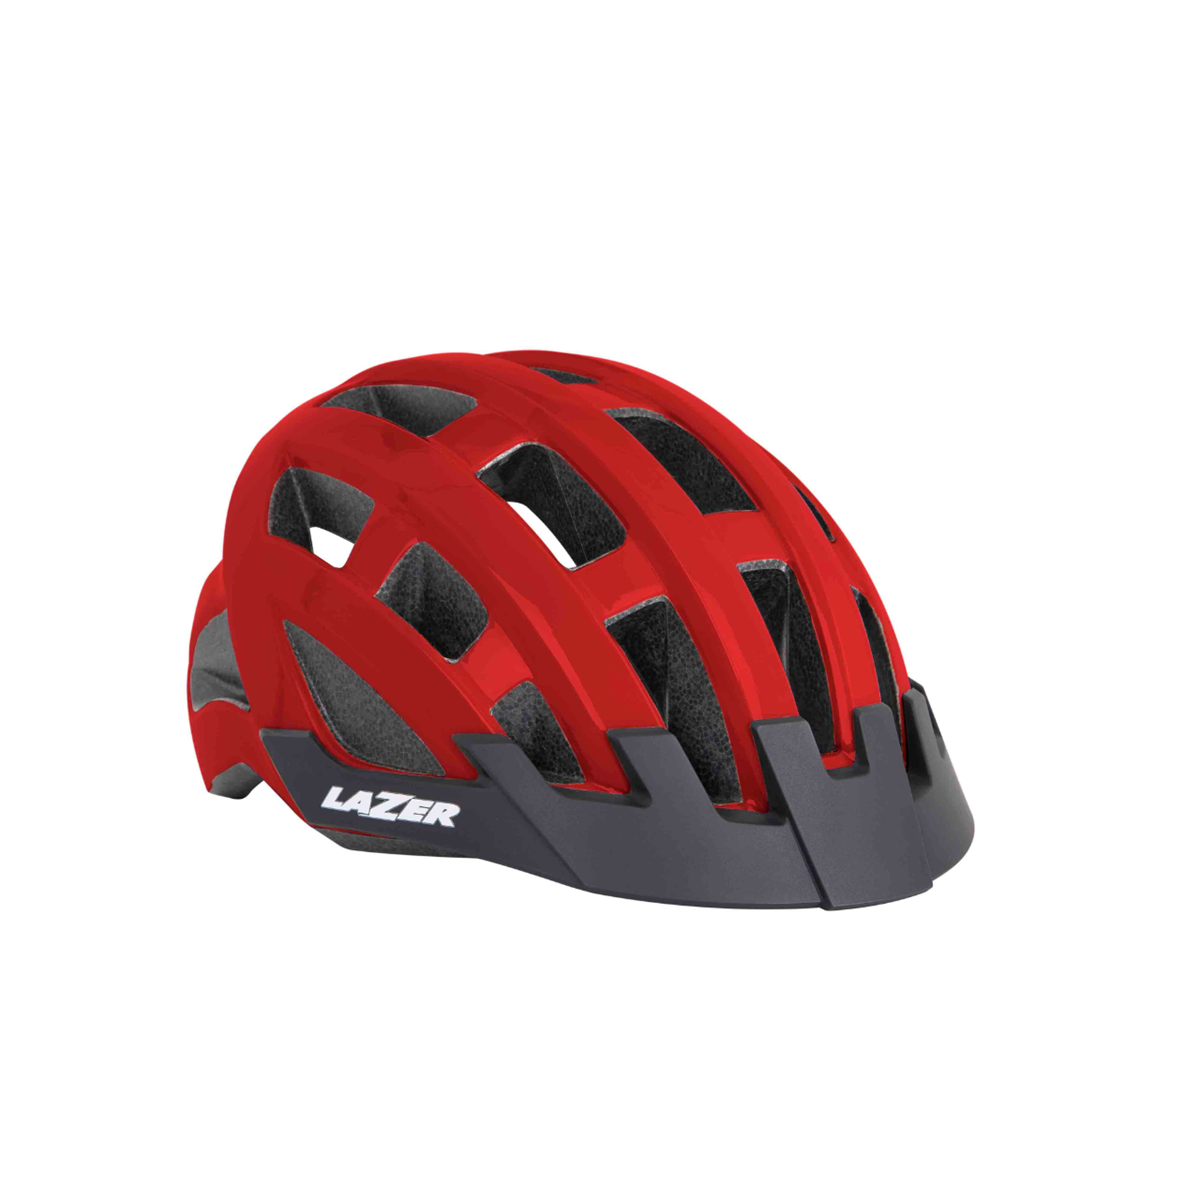 LAZER Kask Compact CE-CPSC